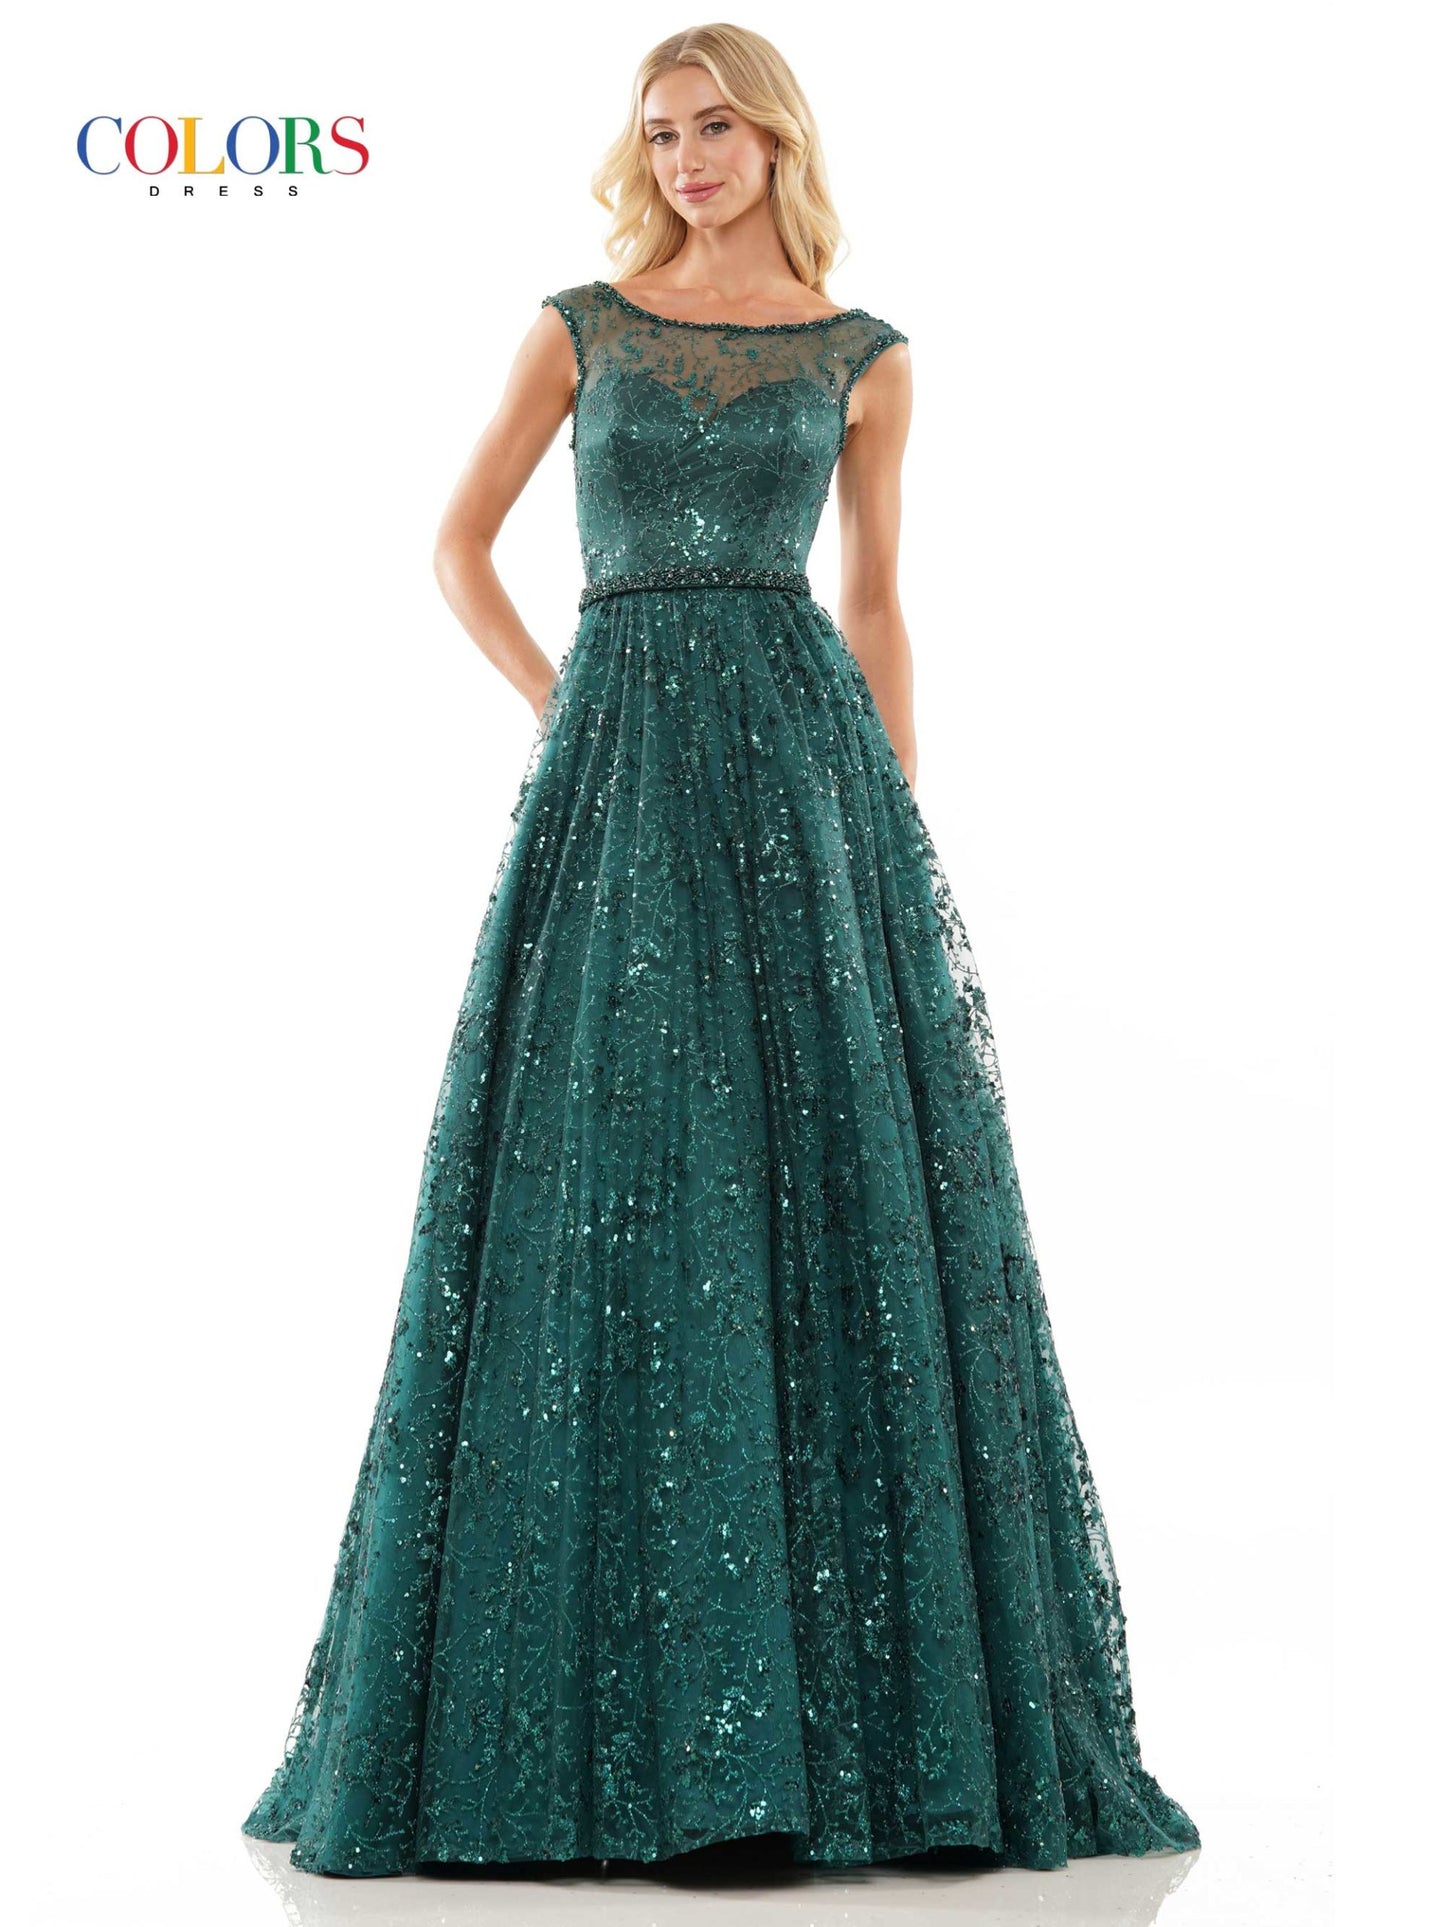 Colors 2980 Long A Line Glitter High neck formal Ballgown Prom Dress Pageant Gown corset lace up back sheer high neckline  Available Sizes: 2-24  Available Colors: Light Blue, Purple, Deep Green, Wine